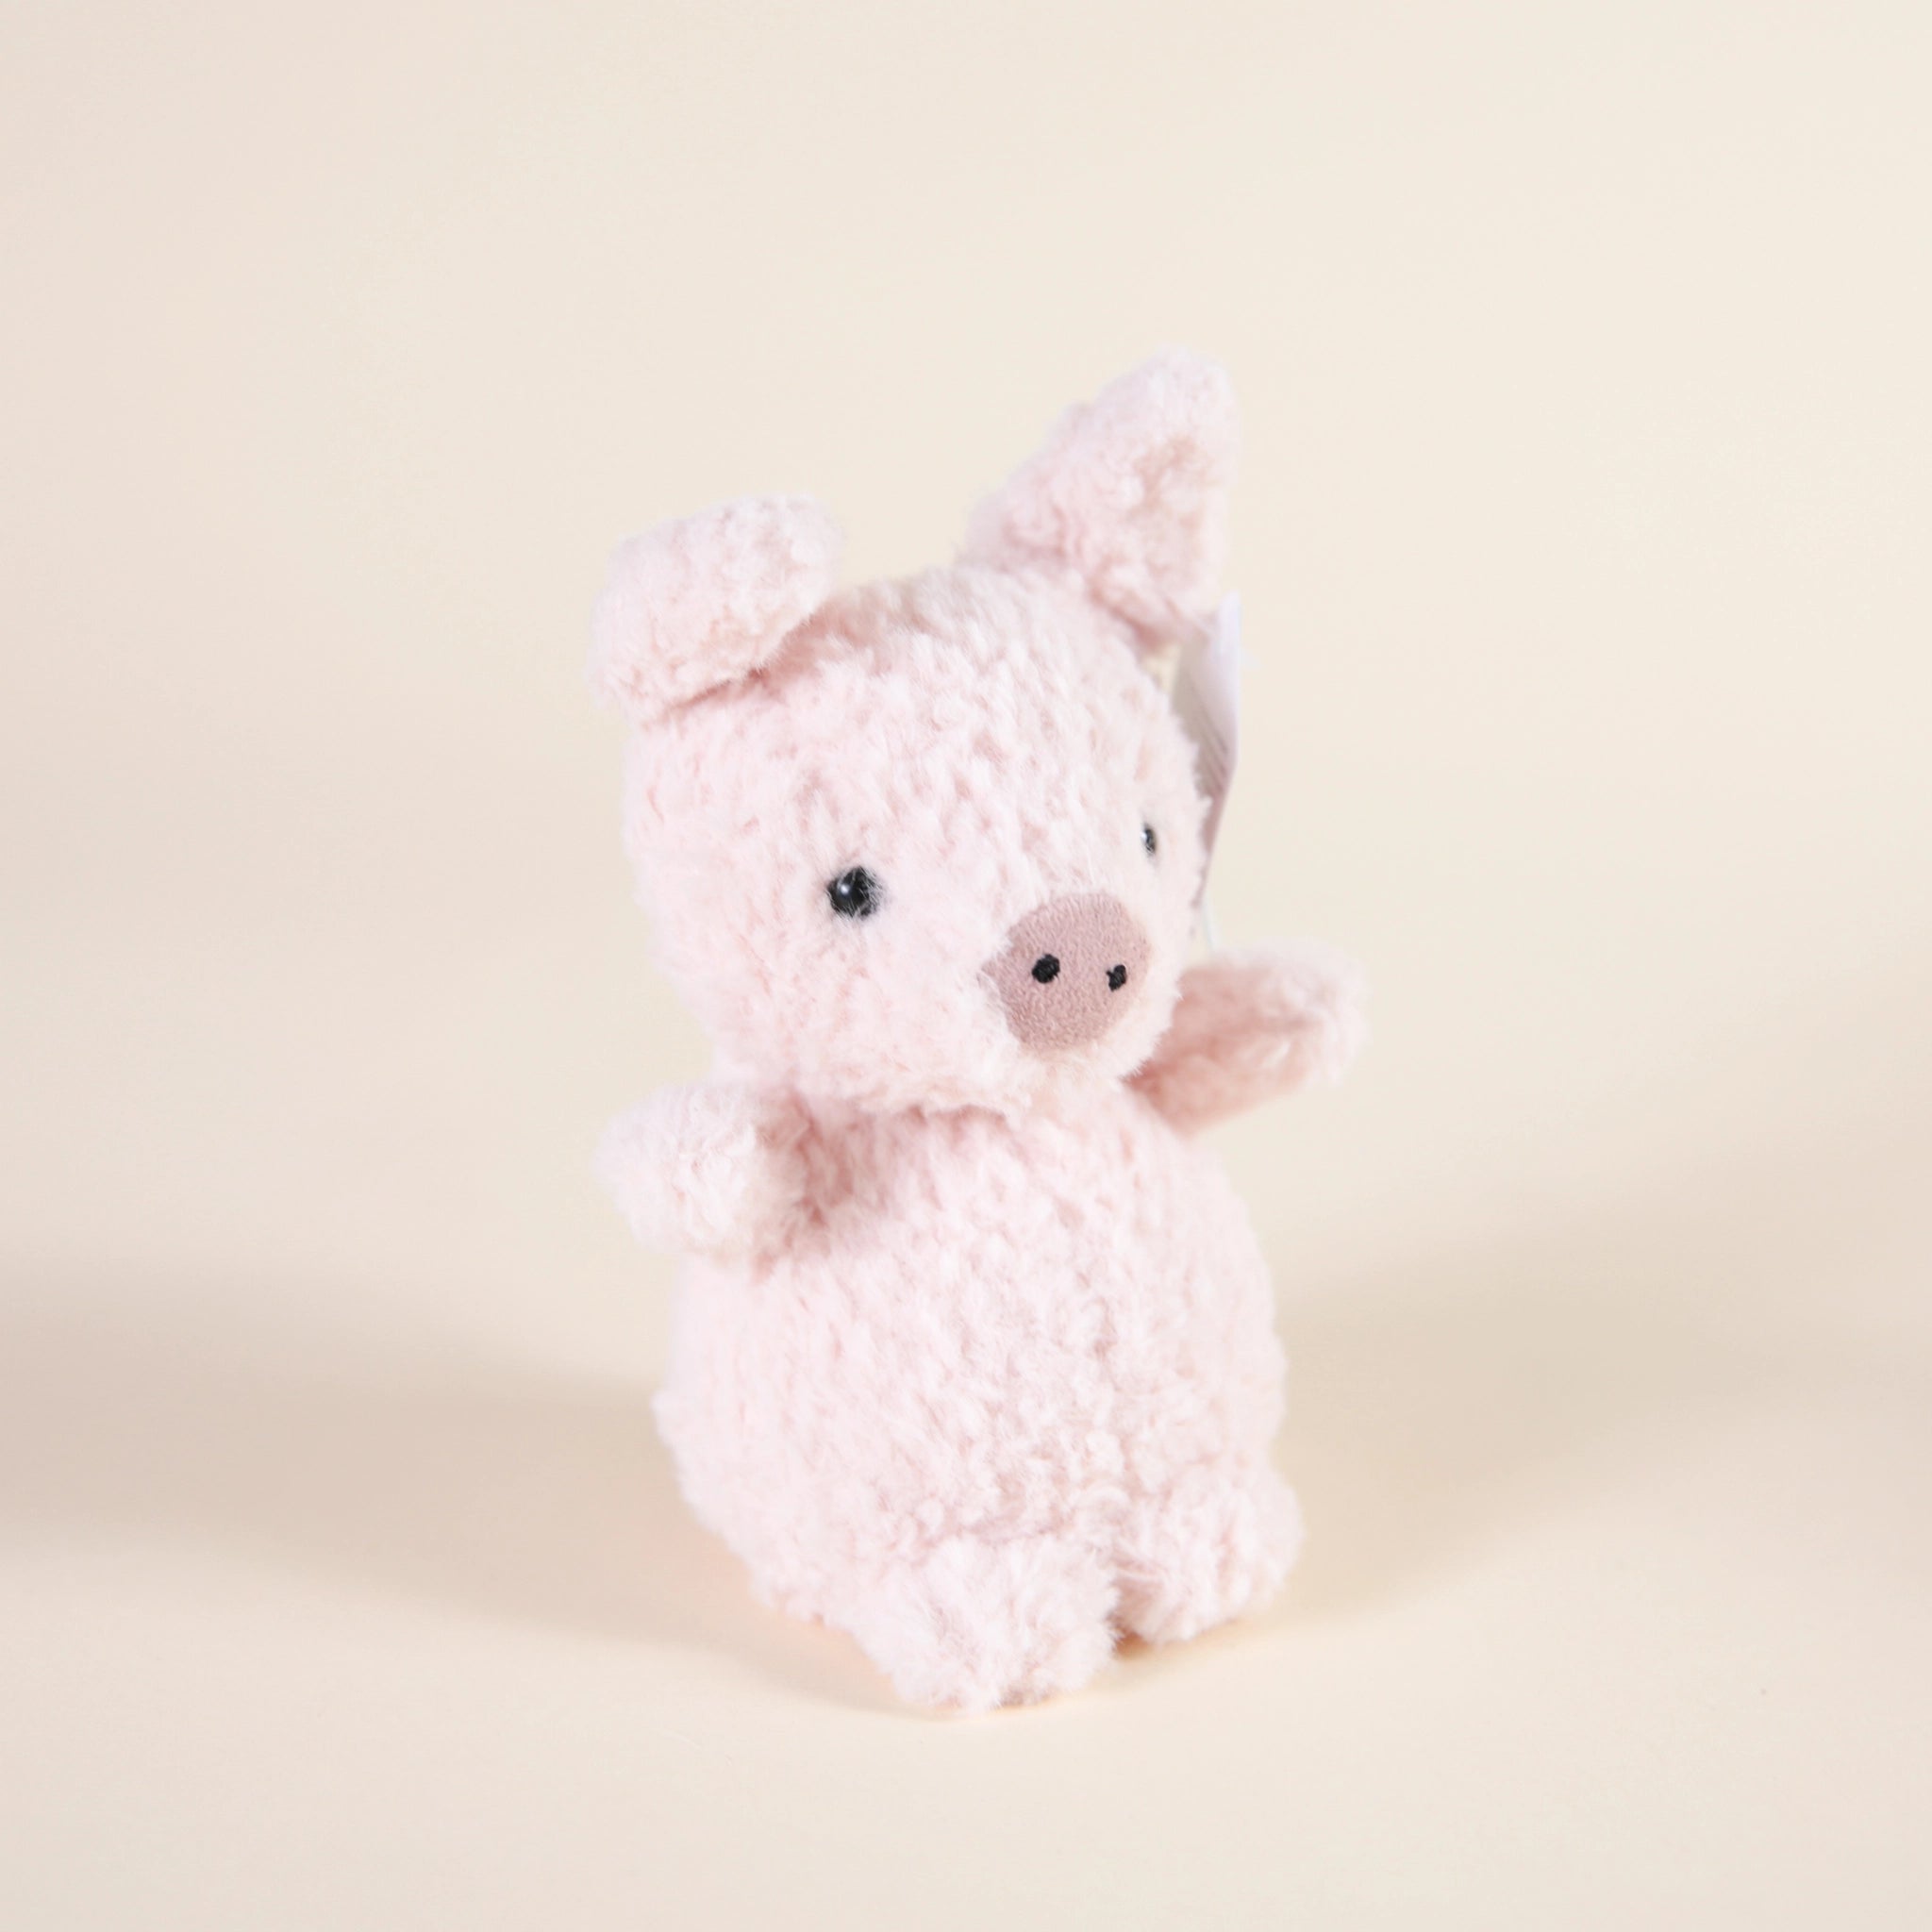 A fuzzy light pink pig stuffed animal that is sitting upright.